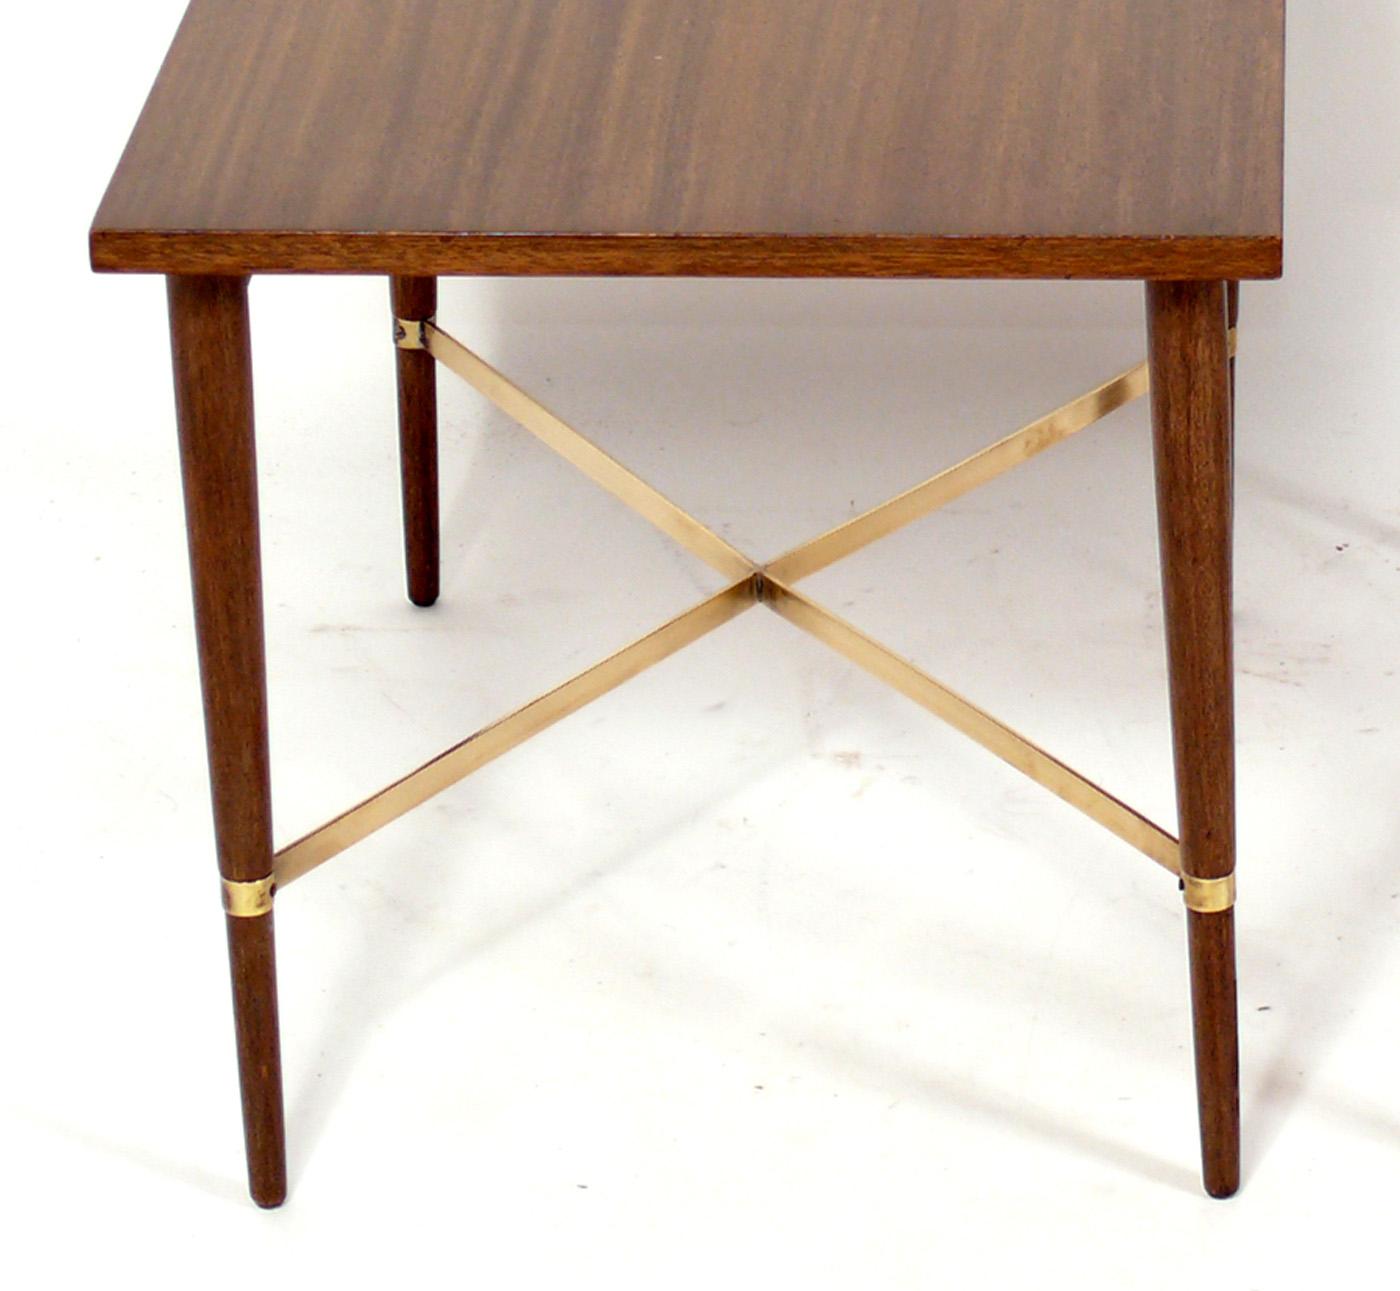 Pair of Mid Century Brass X Base End Tables, designed by Paul McCobb, American, circa 1950s. They are being refinished and can be completed in your choice of color. The price noted includes refinishing in your choice of color. The brass elements